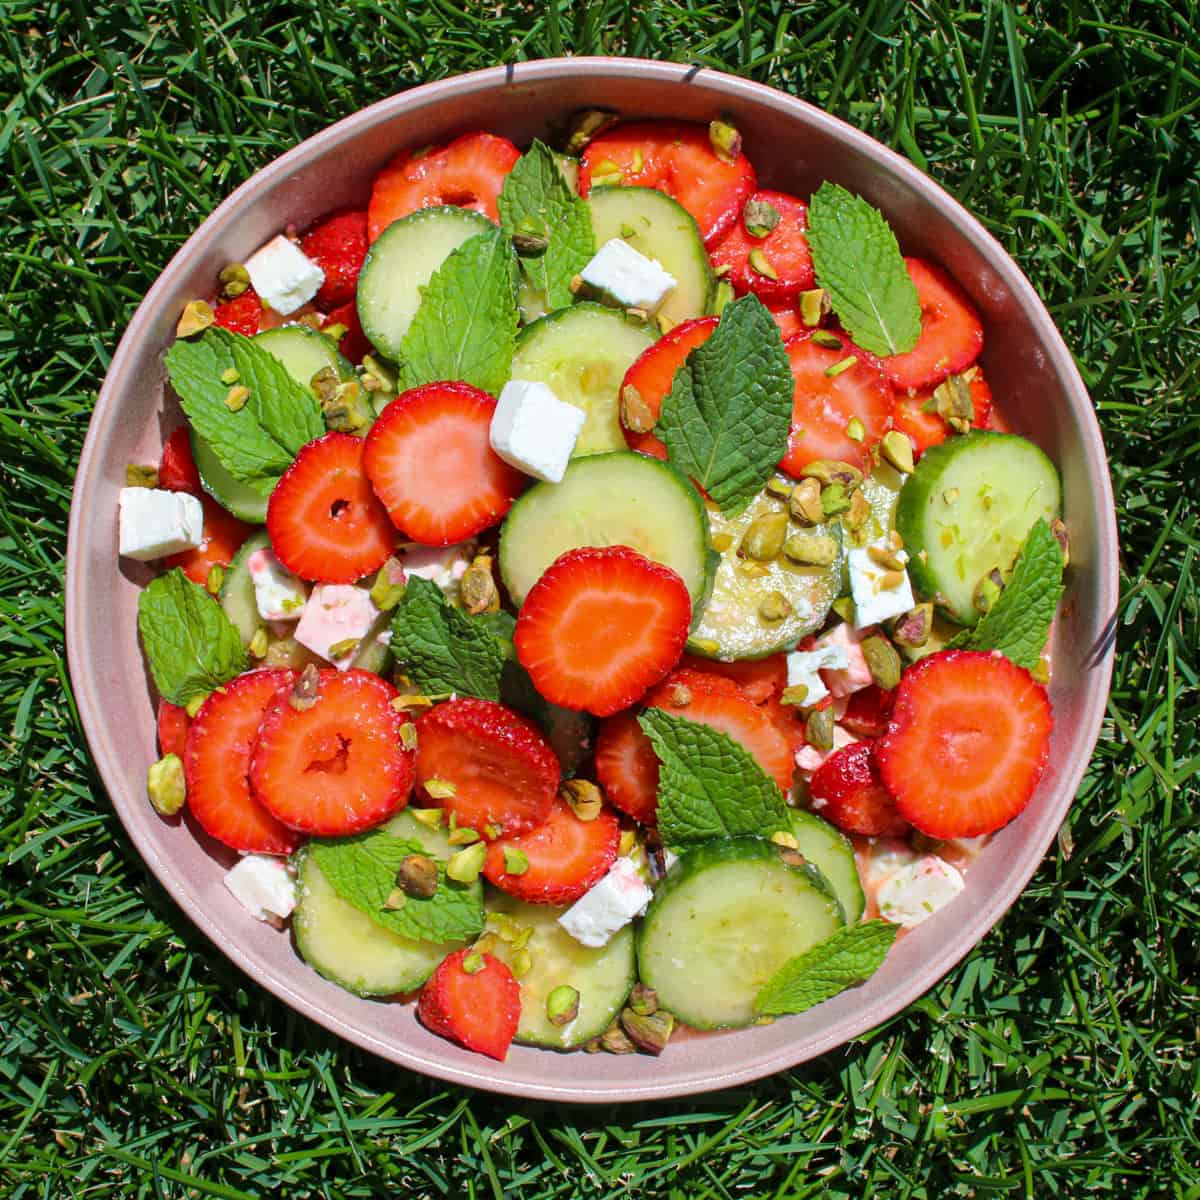 Strawberry cucumber salad in a pink bowl on the grass.